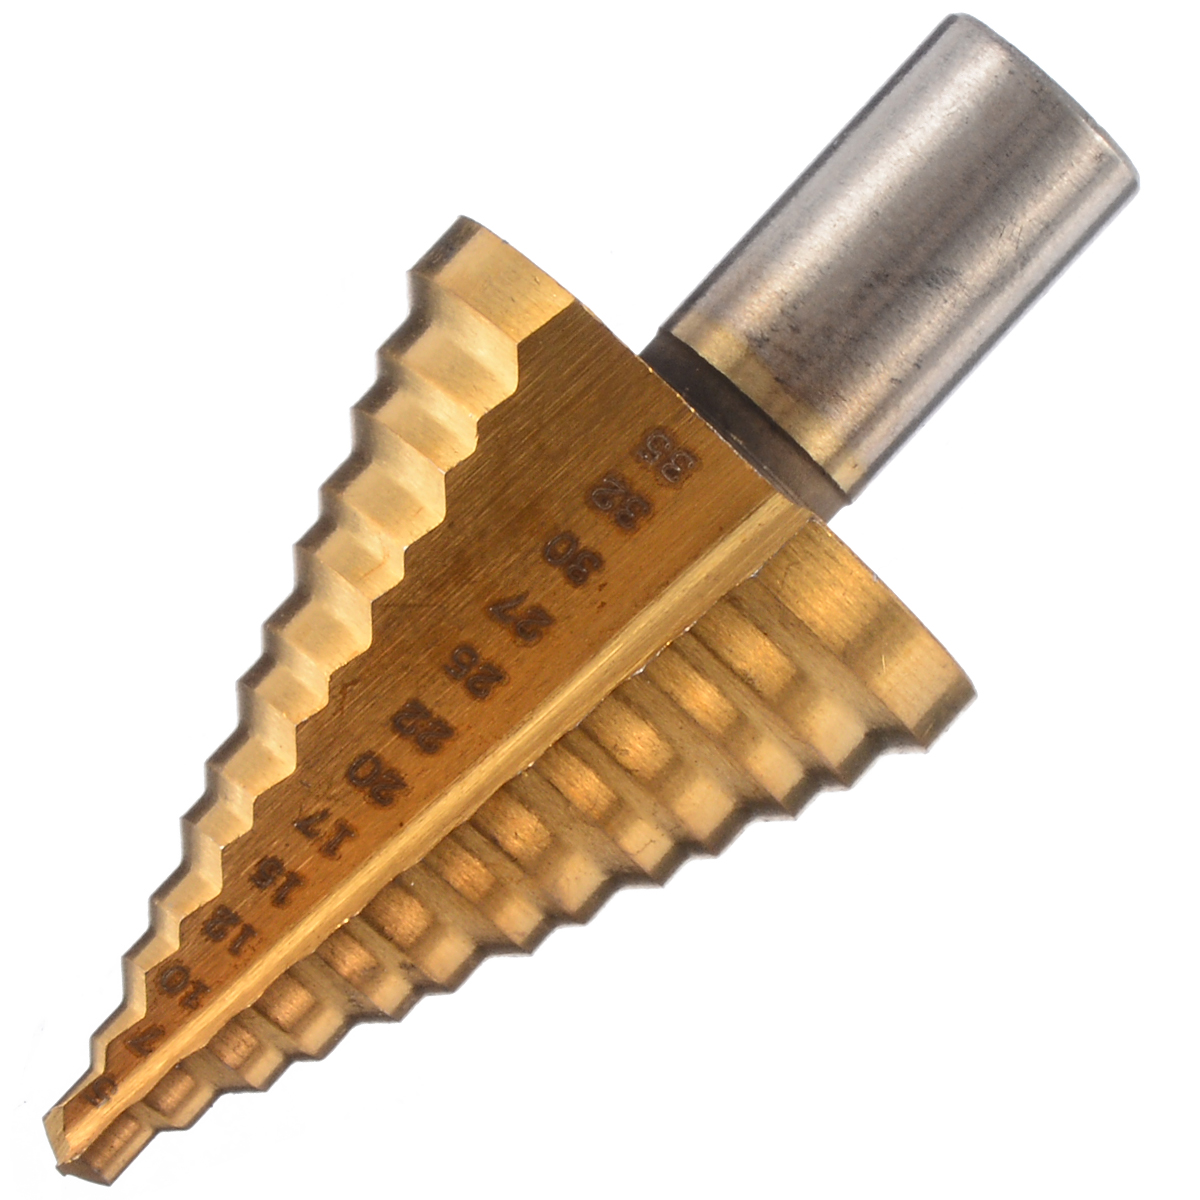 Titanium Coated Cone HSS Steel Step Drill Bit 5-35mm Cone Step Drill Power Metal Wood Working Drilling Hole Cutter Tools